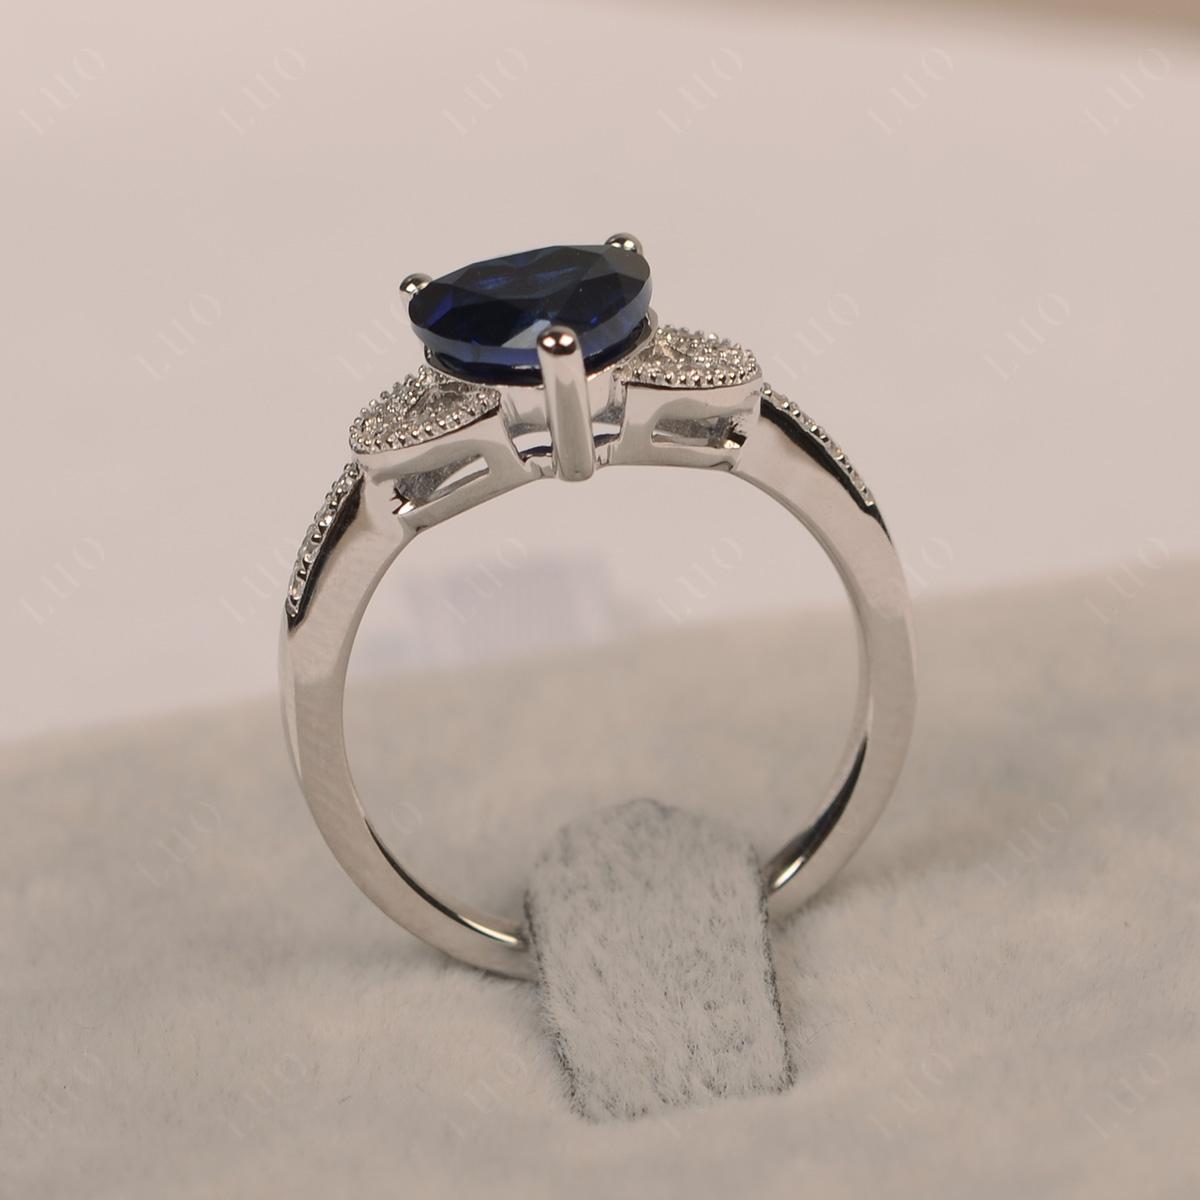 Heart Shaped Sapphire Engagement Ring - LUO Jewelry